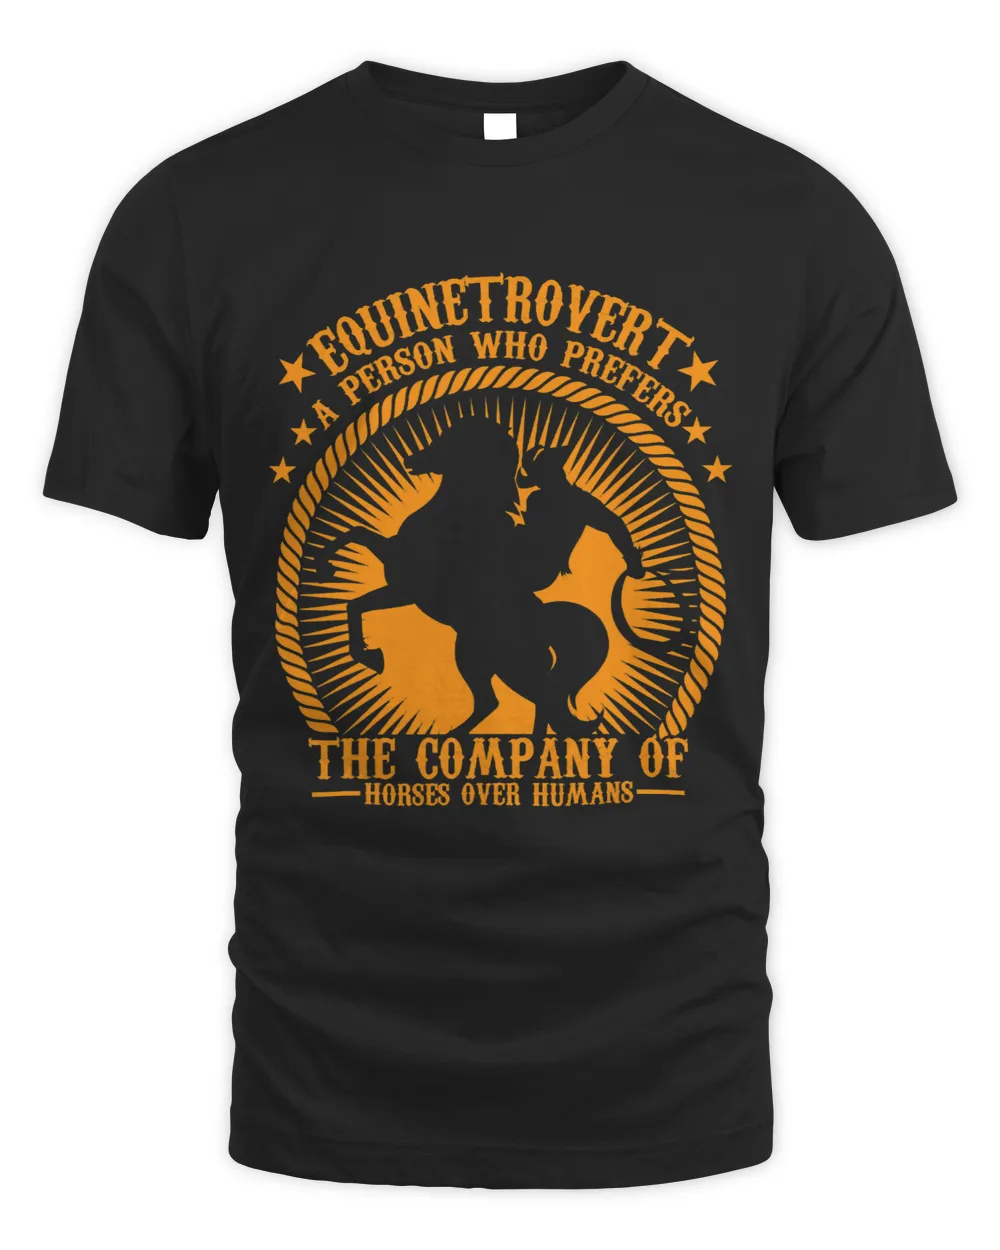 Equinetrovert A Person Who Prefers The Company Of Horses